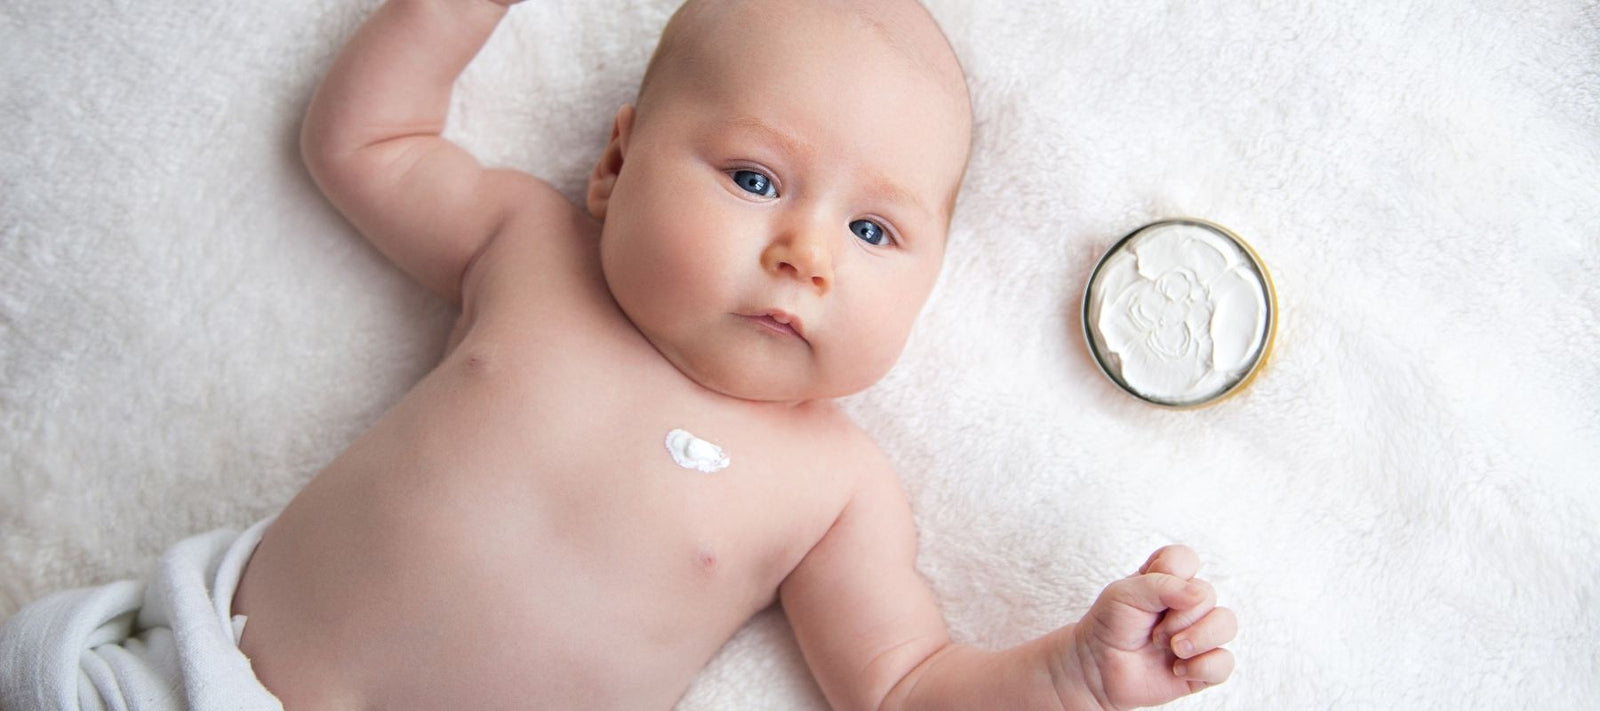 Baby Skin Care: 10 Tips, Products to Use, and More